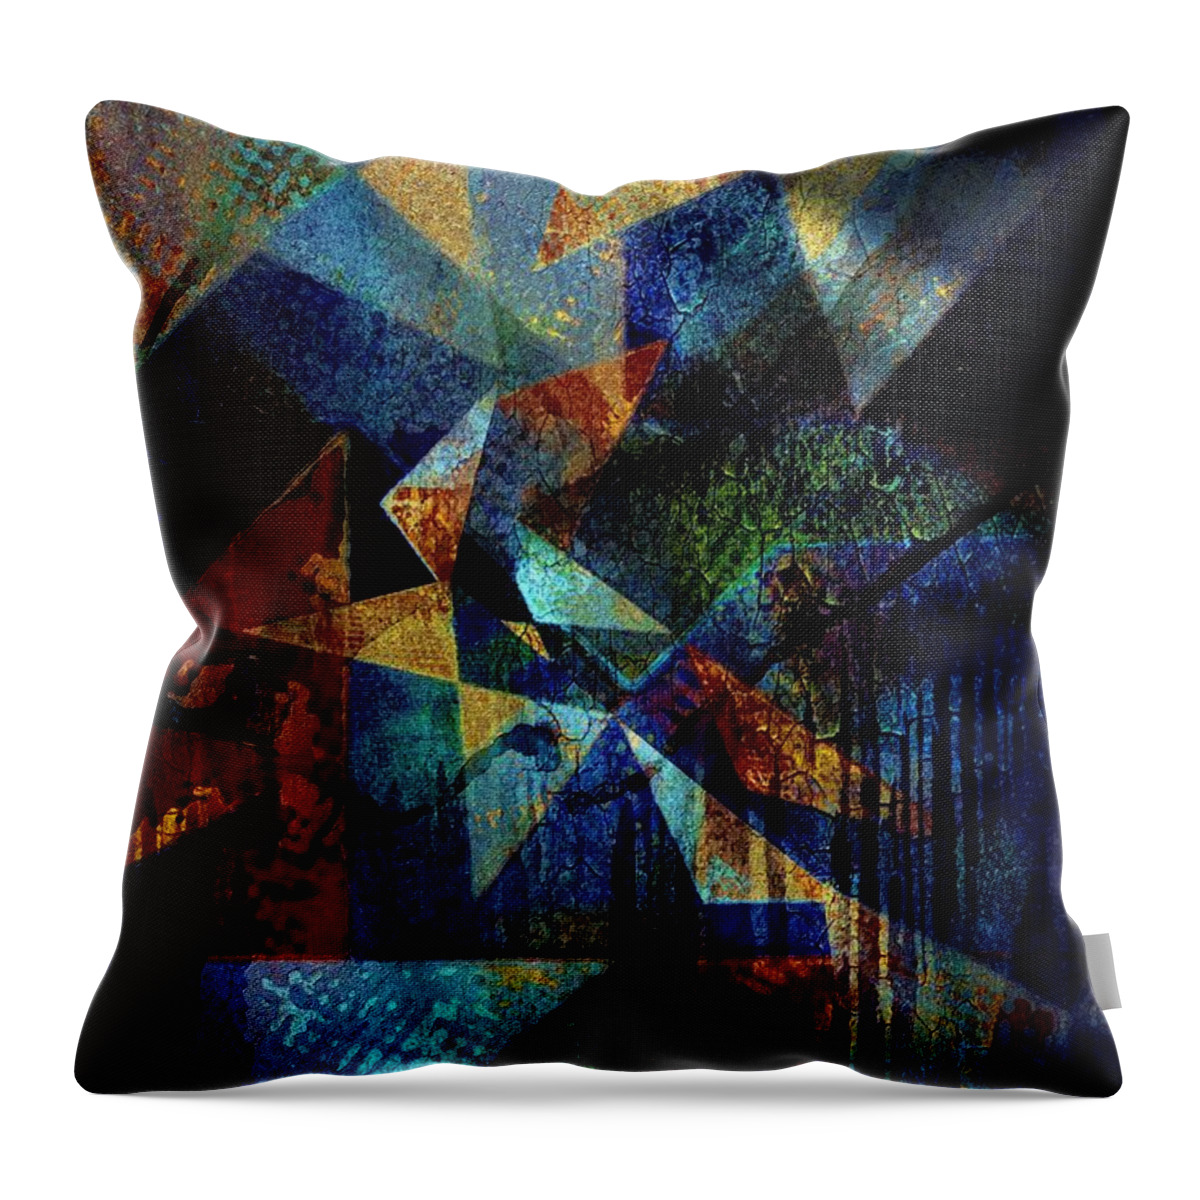  Reflections Throw Pillow featuring the digital art Shattered Reflections by Mimulux Patricia No